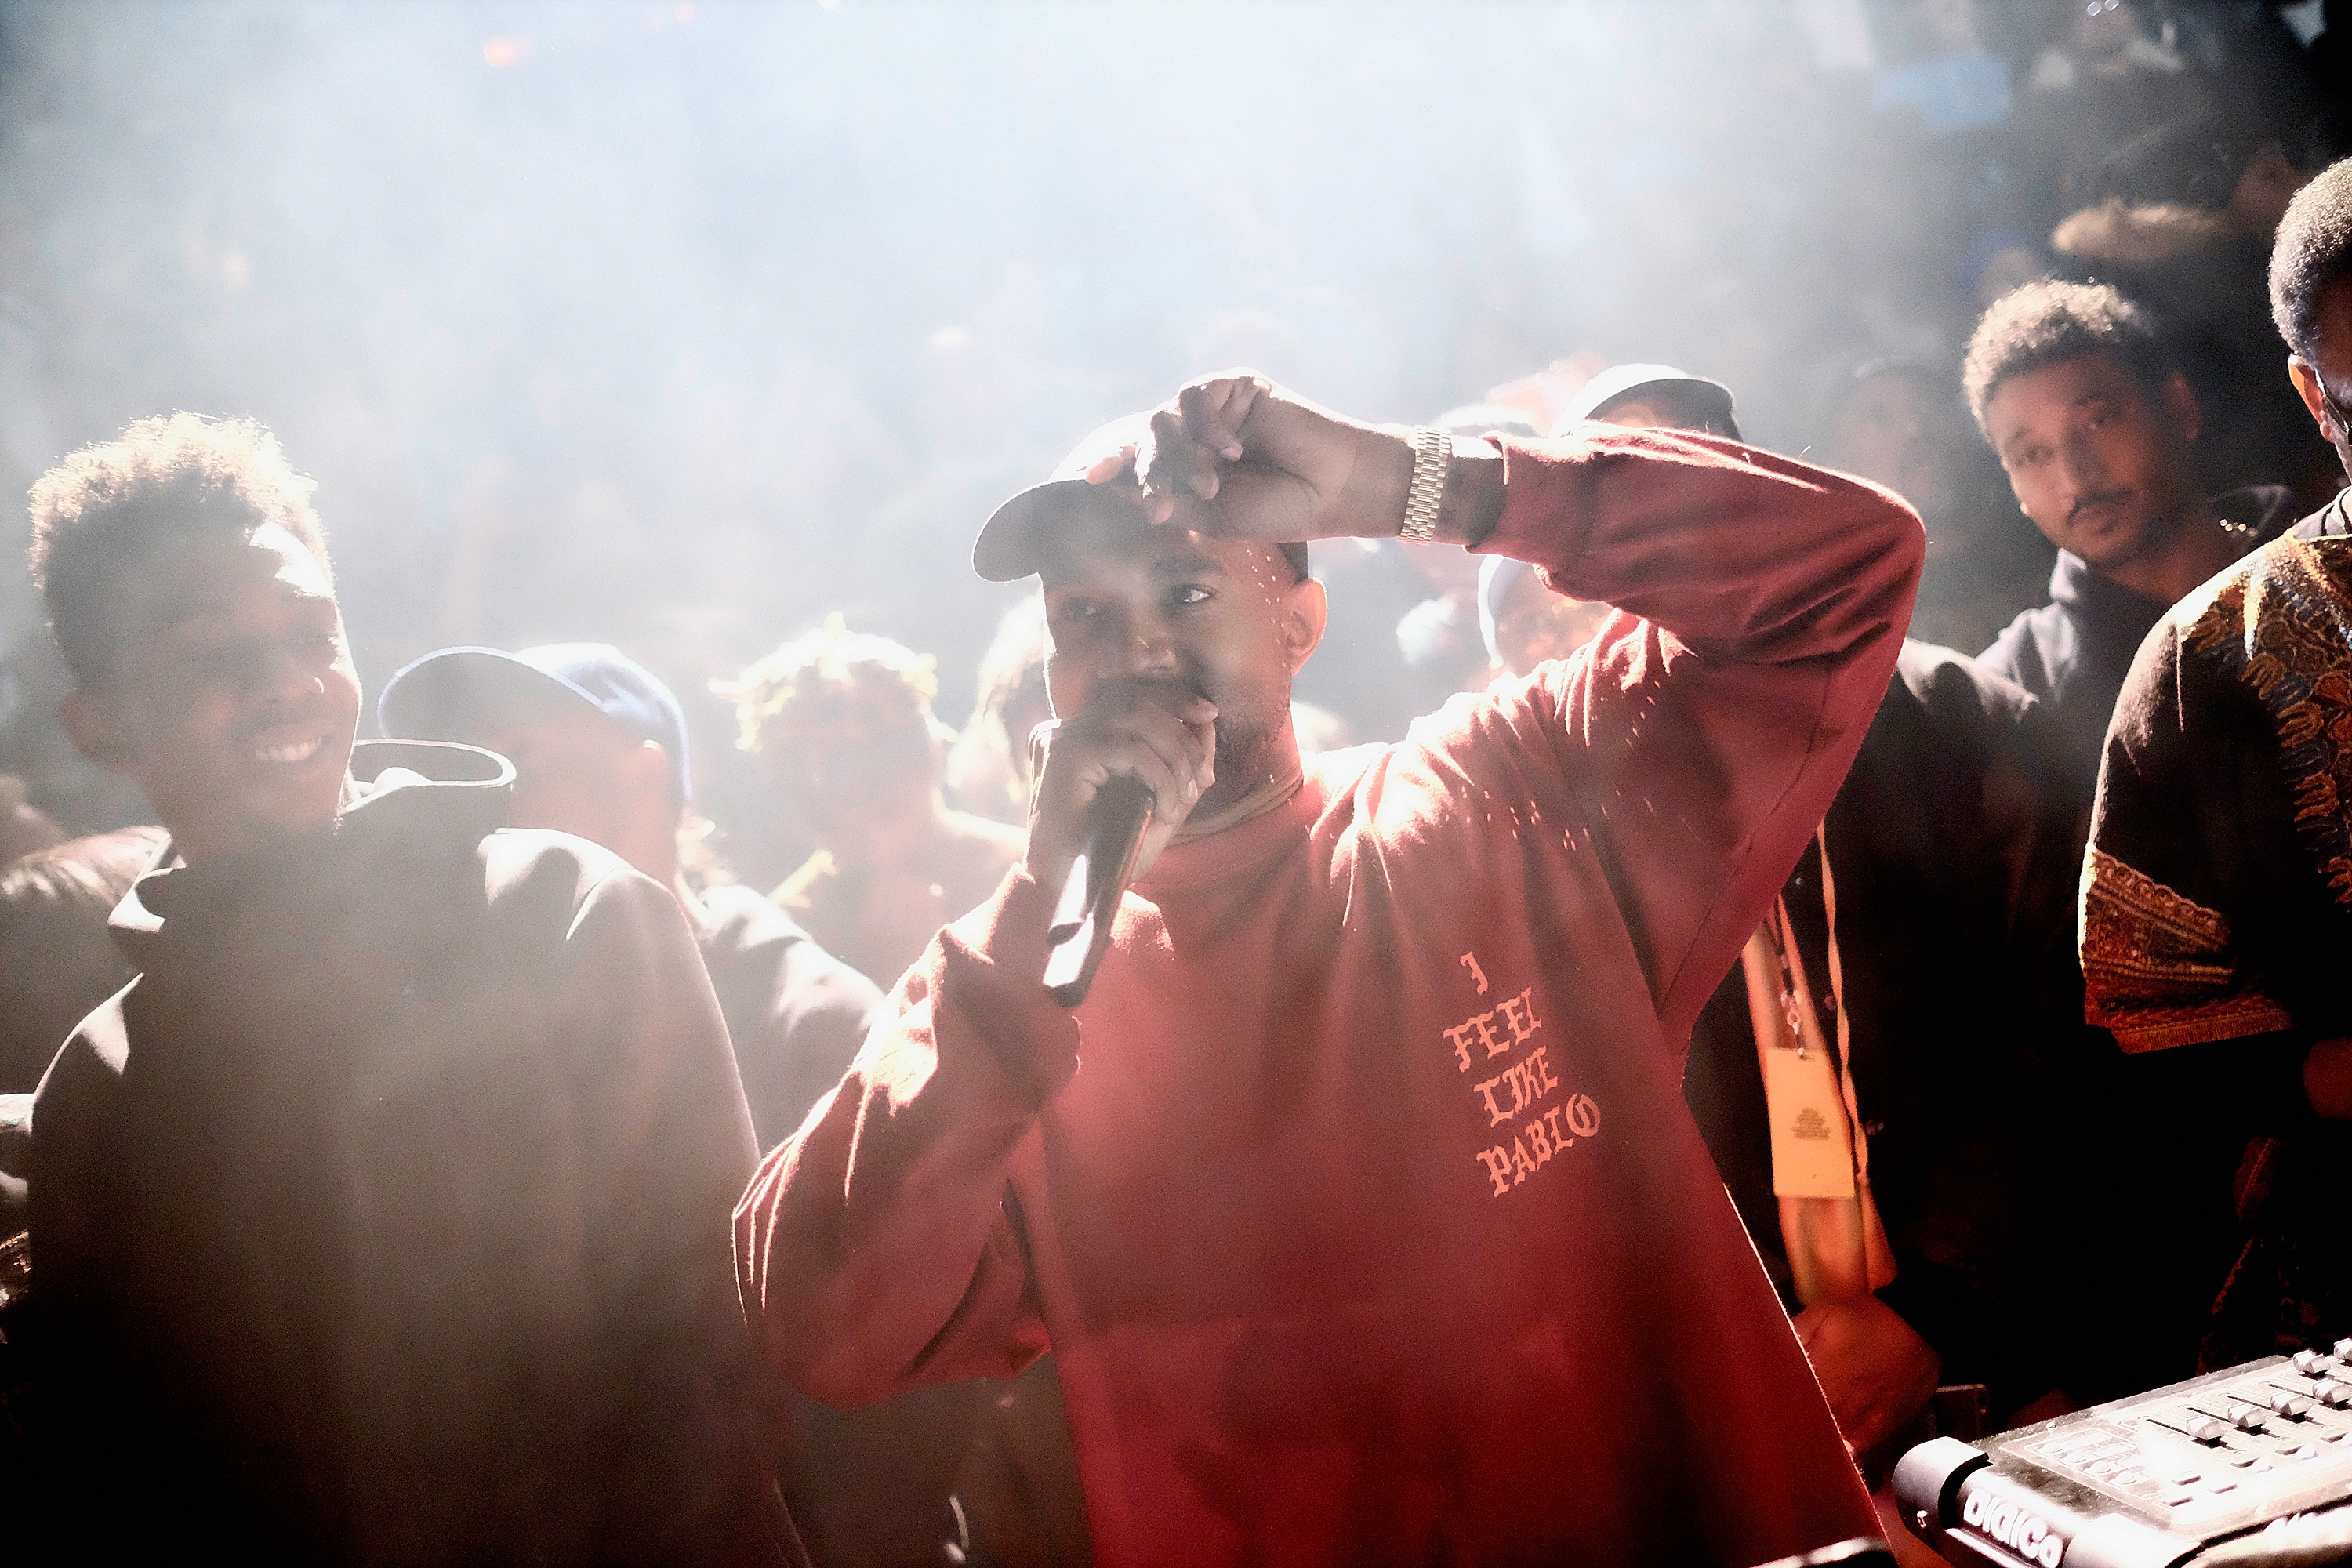 Kanye West performs during Kanye West Yeezy Season 3 on February 11, 2016 in New York City. (Dimitrios Kambouris—Getty Images)